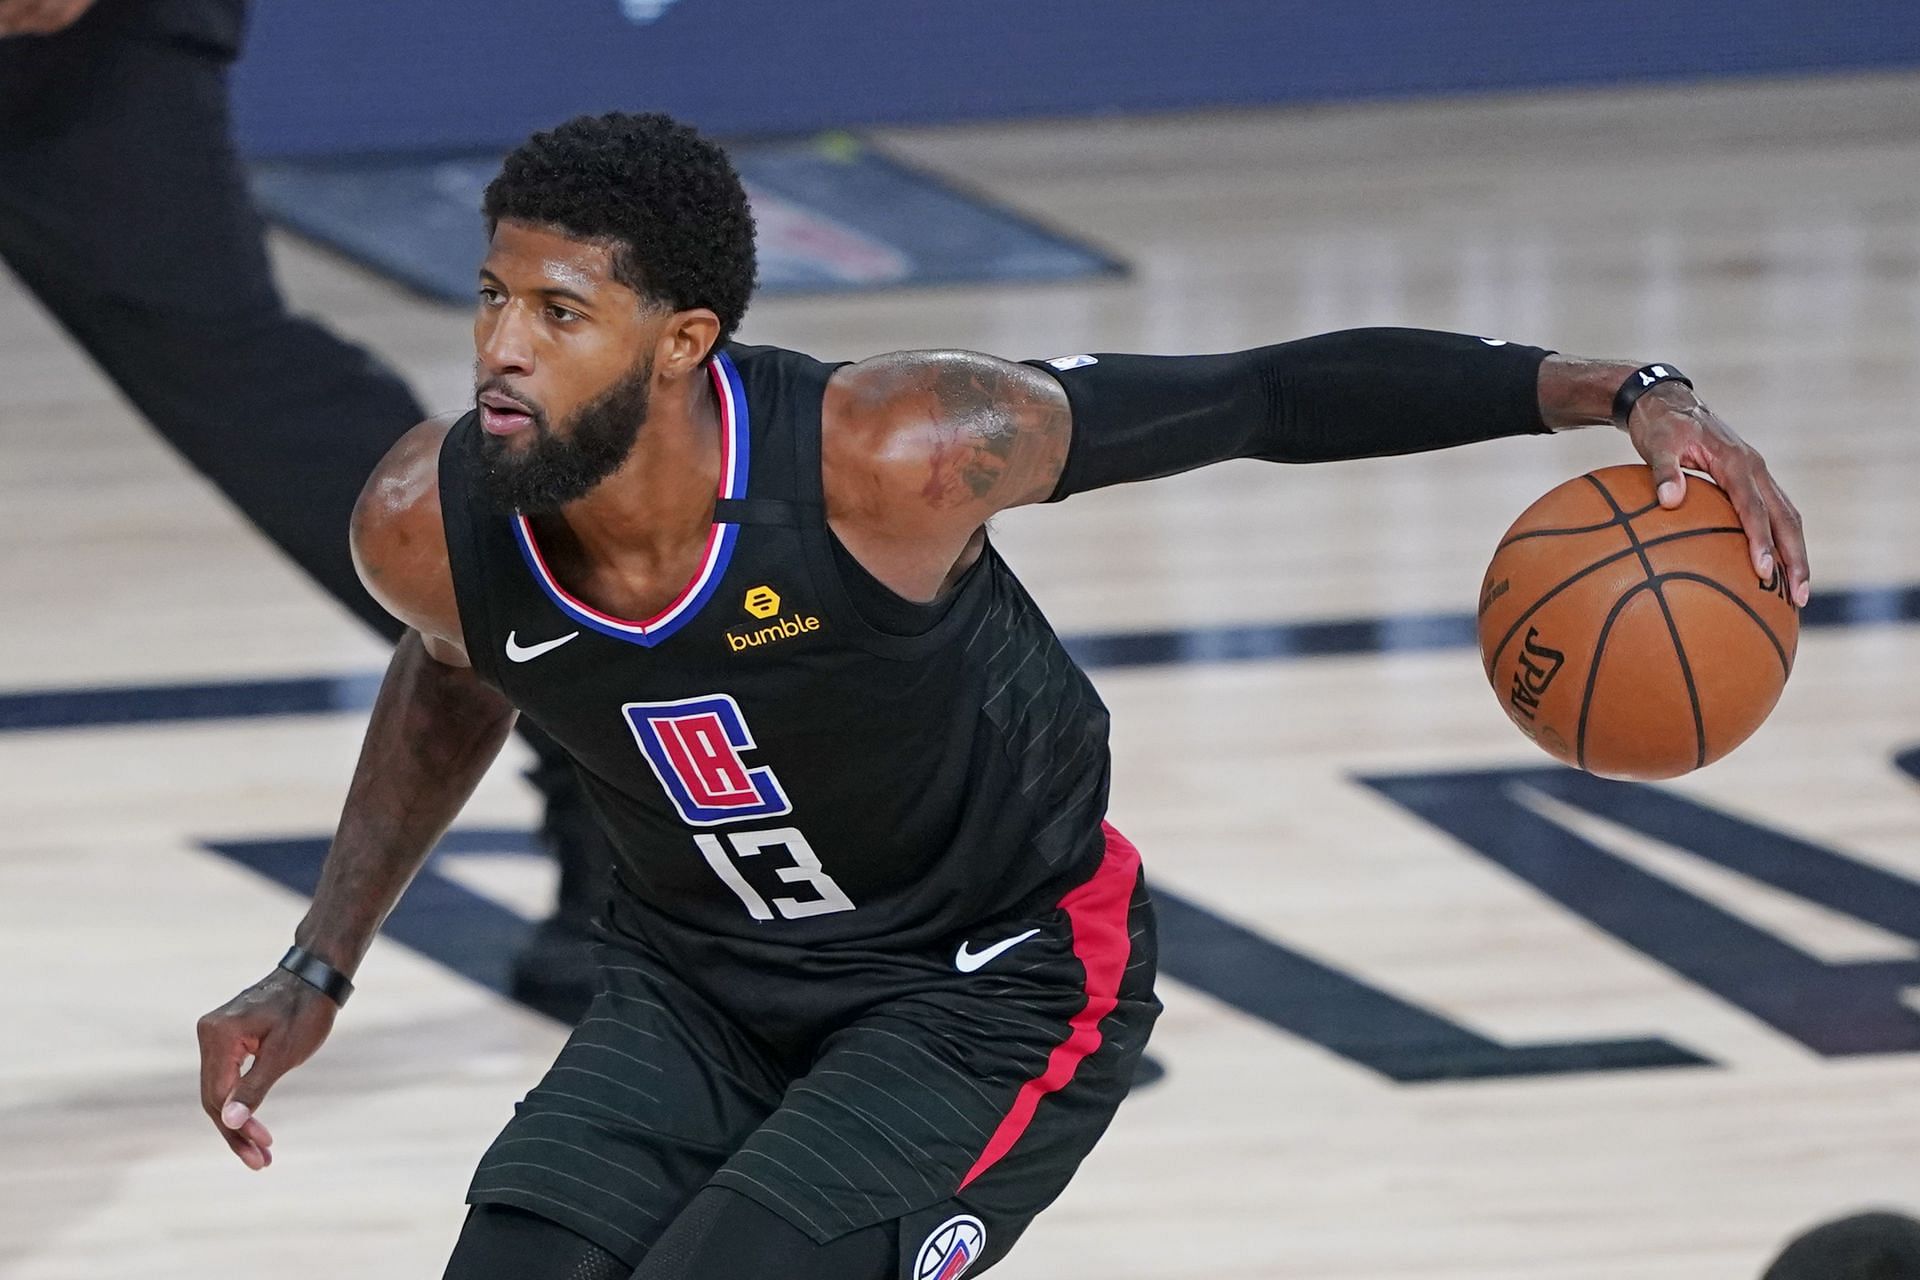 Paul George could be in position for a career year with the Los Angeles Clippers